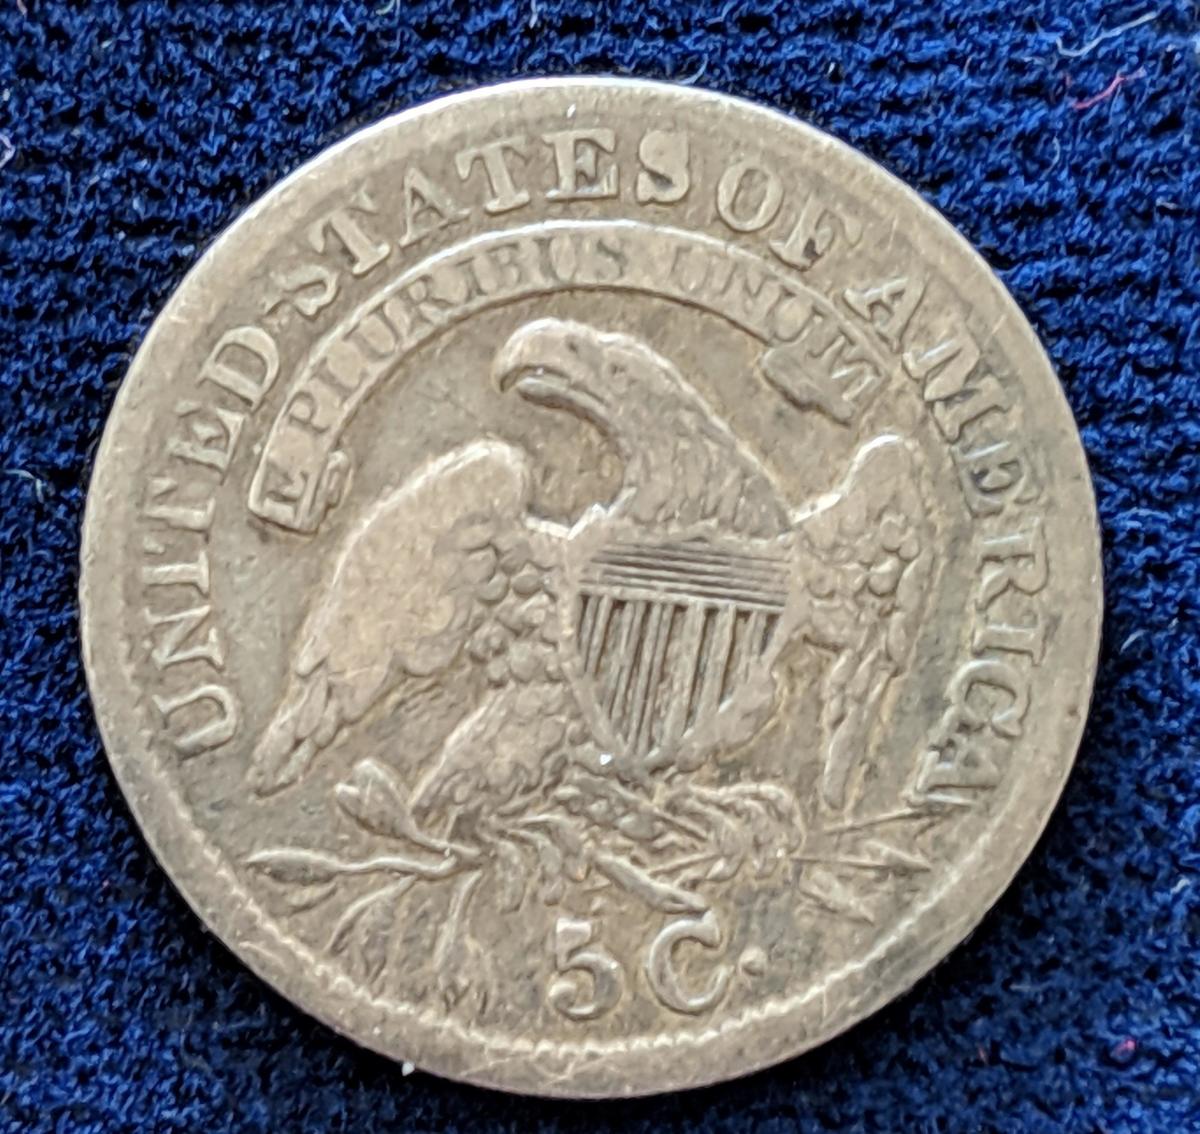 Reverse of an 1834 half dime with 5c on reverse. Images courtesy of USAcoinbook.com